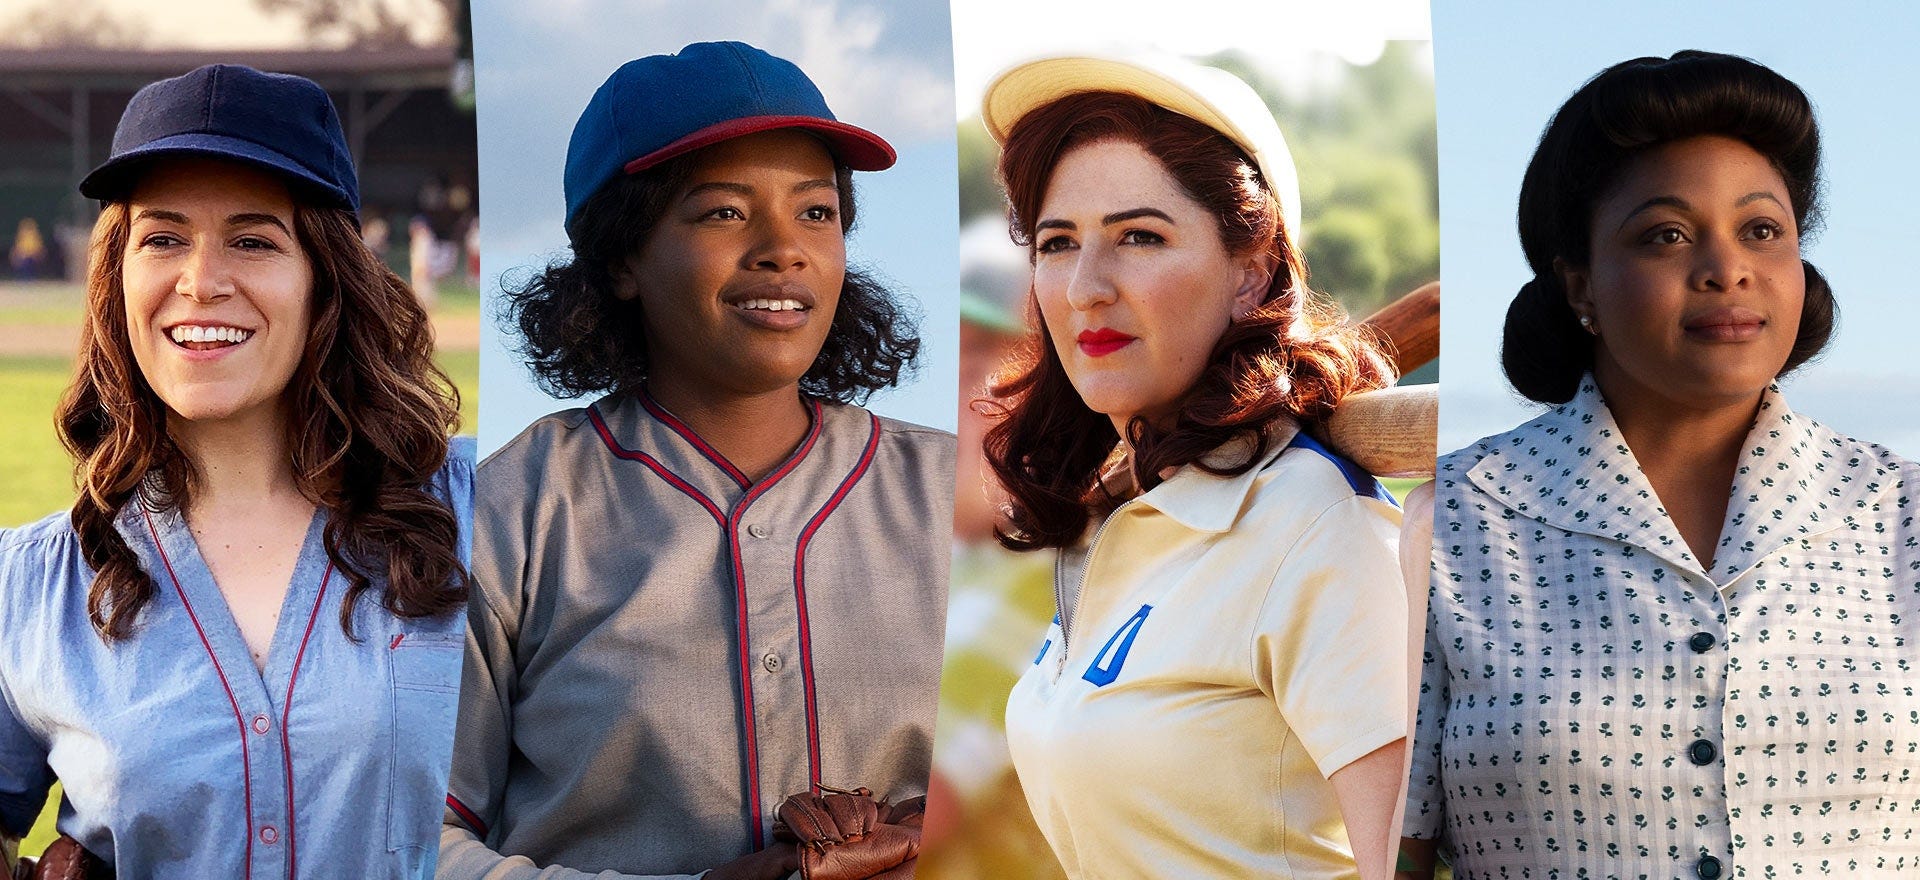 A League of Their Own' Is Finally Gay With New Reboot on